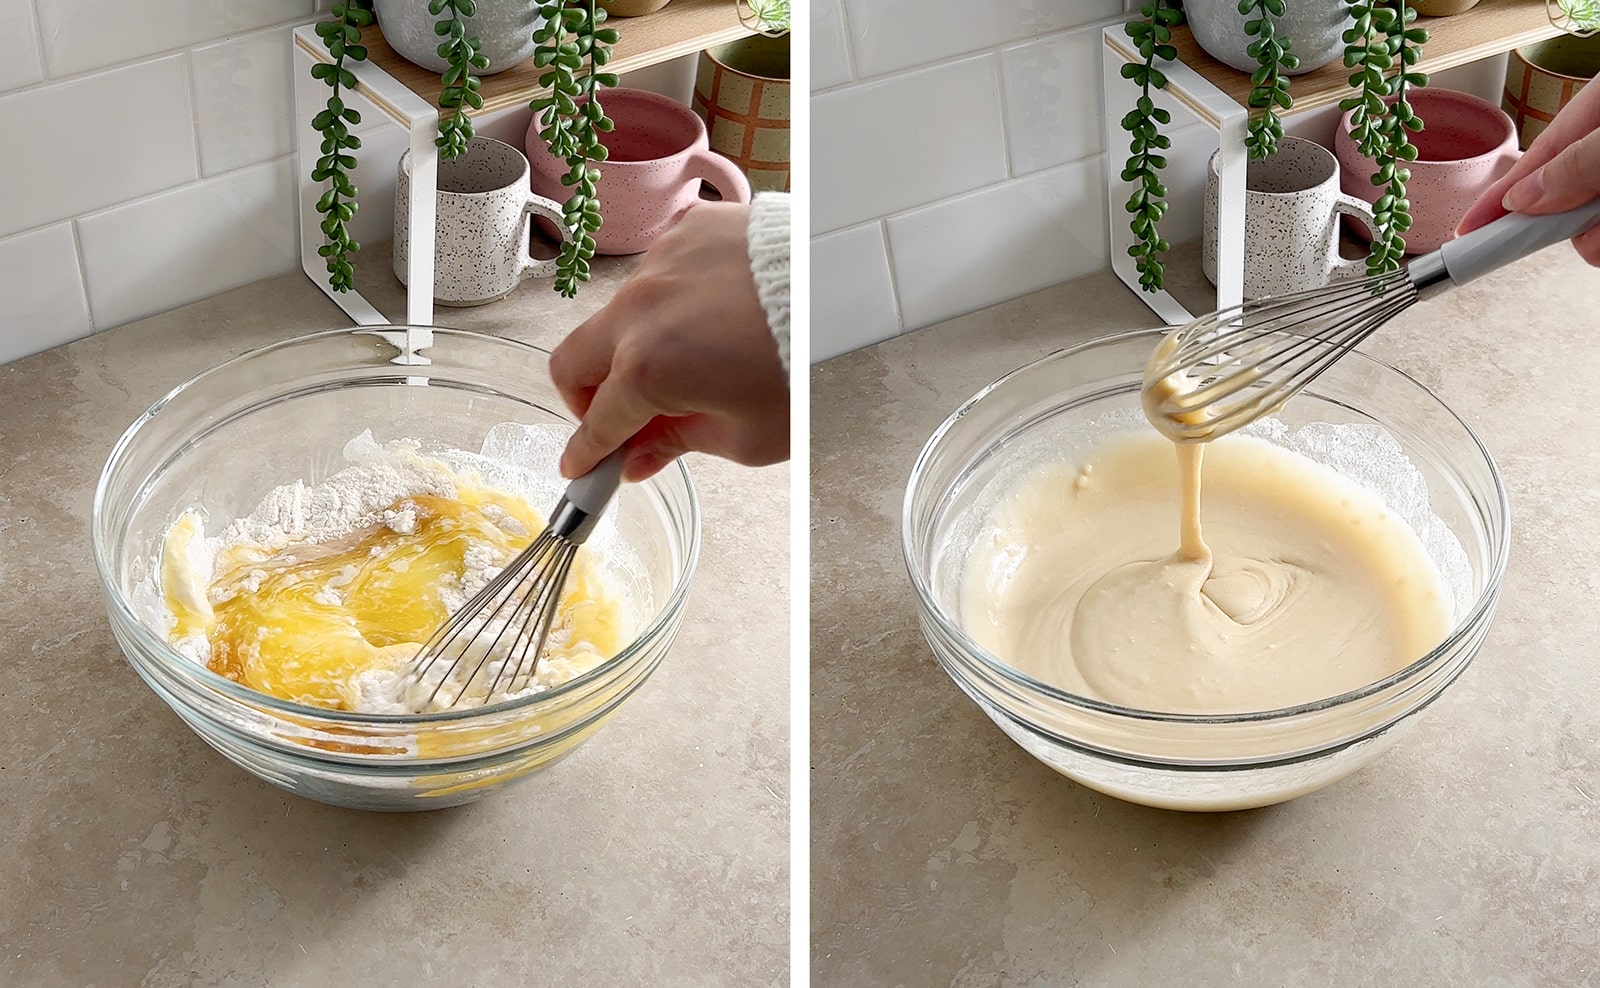 Left to right: whisking wet ingredients into dry ingredients in mixing bowl, batter dripping off whisk into mixing bowl.